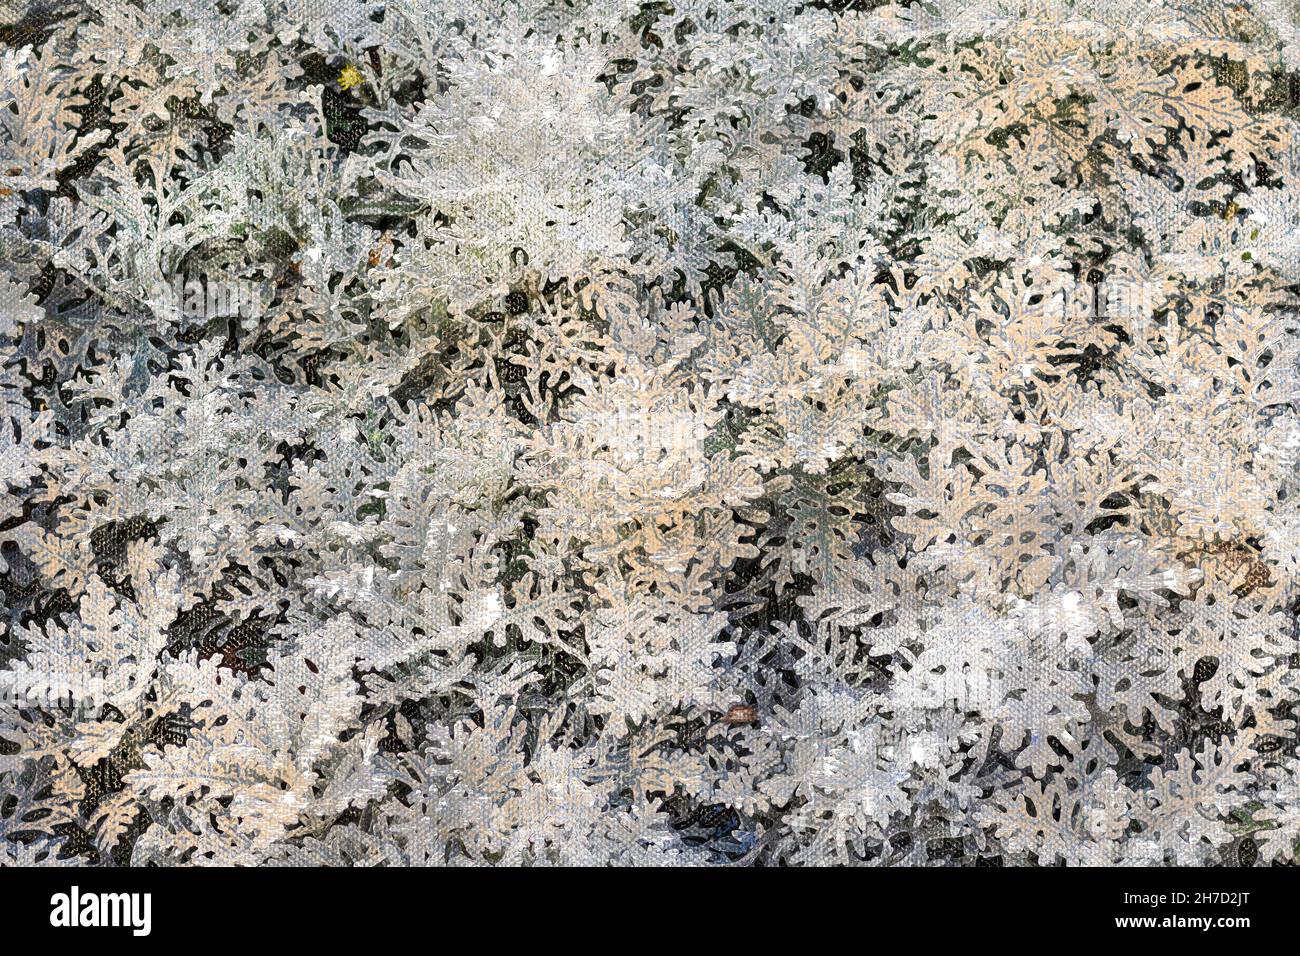 Jacobaea maritima, Dusty miller, Silver dust or Silver ragwort. Full frame of gray-silver leaves of the ornamental plant. Digital watercolor painting Stock Photo